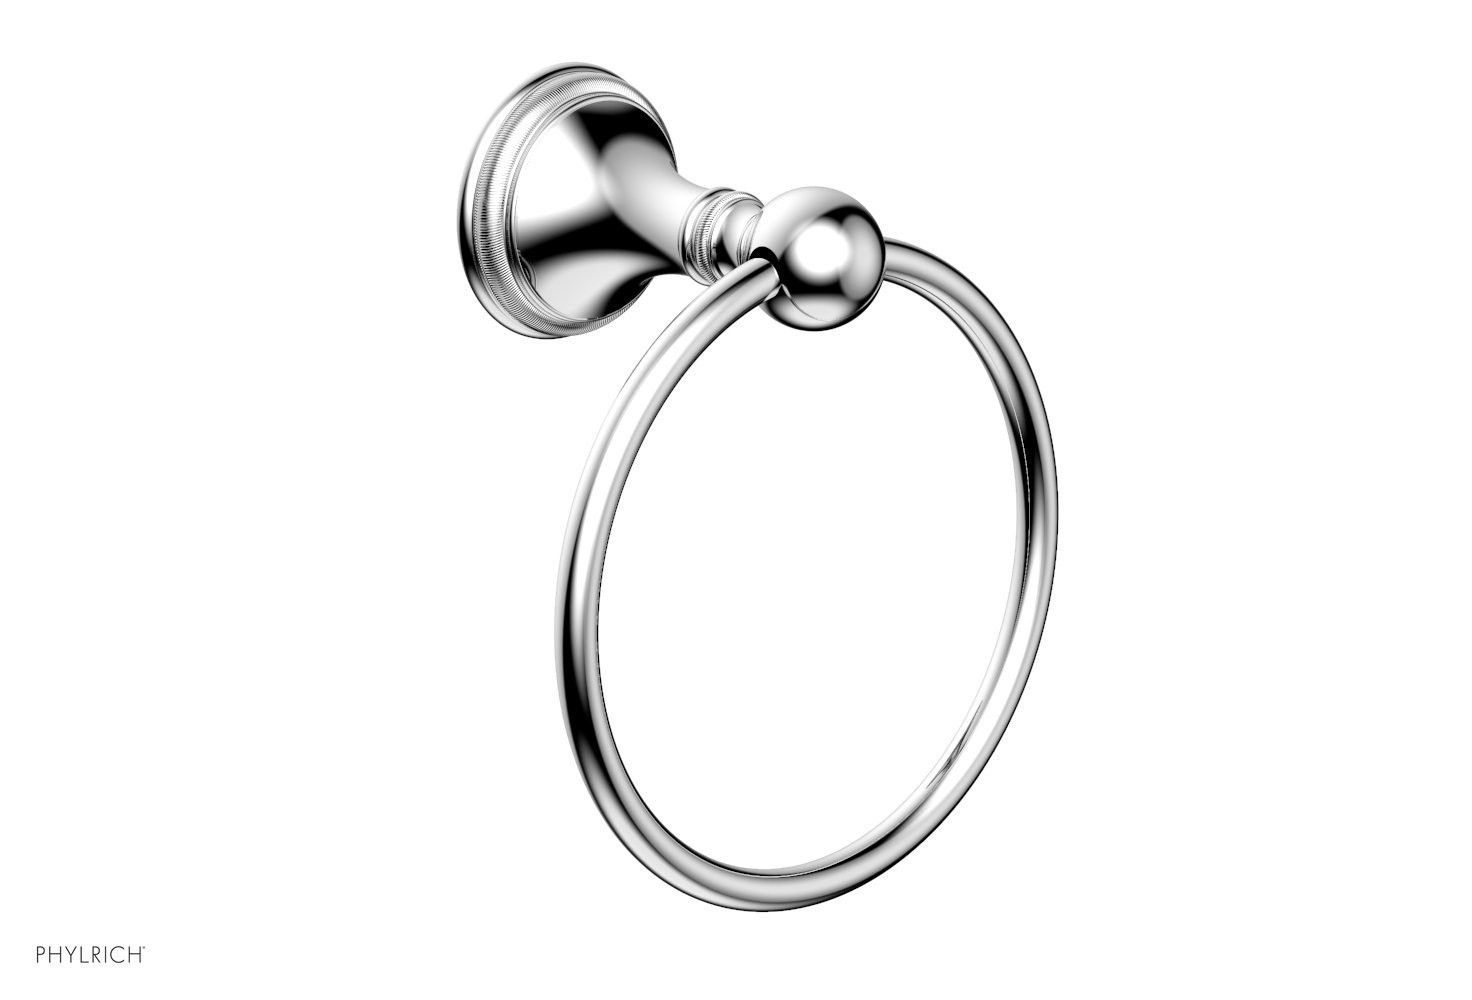 PHYLRICH 208-75 COINED 6 INCH WALL MOUNT TOWEL RING